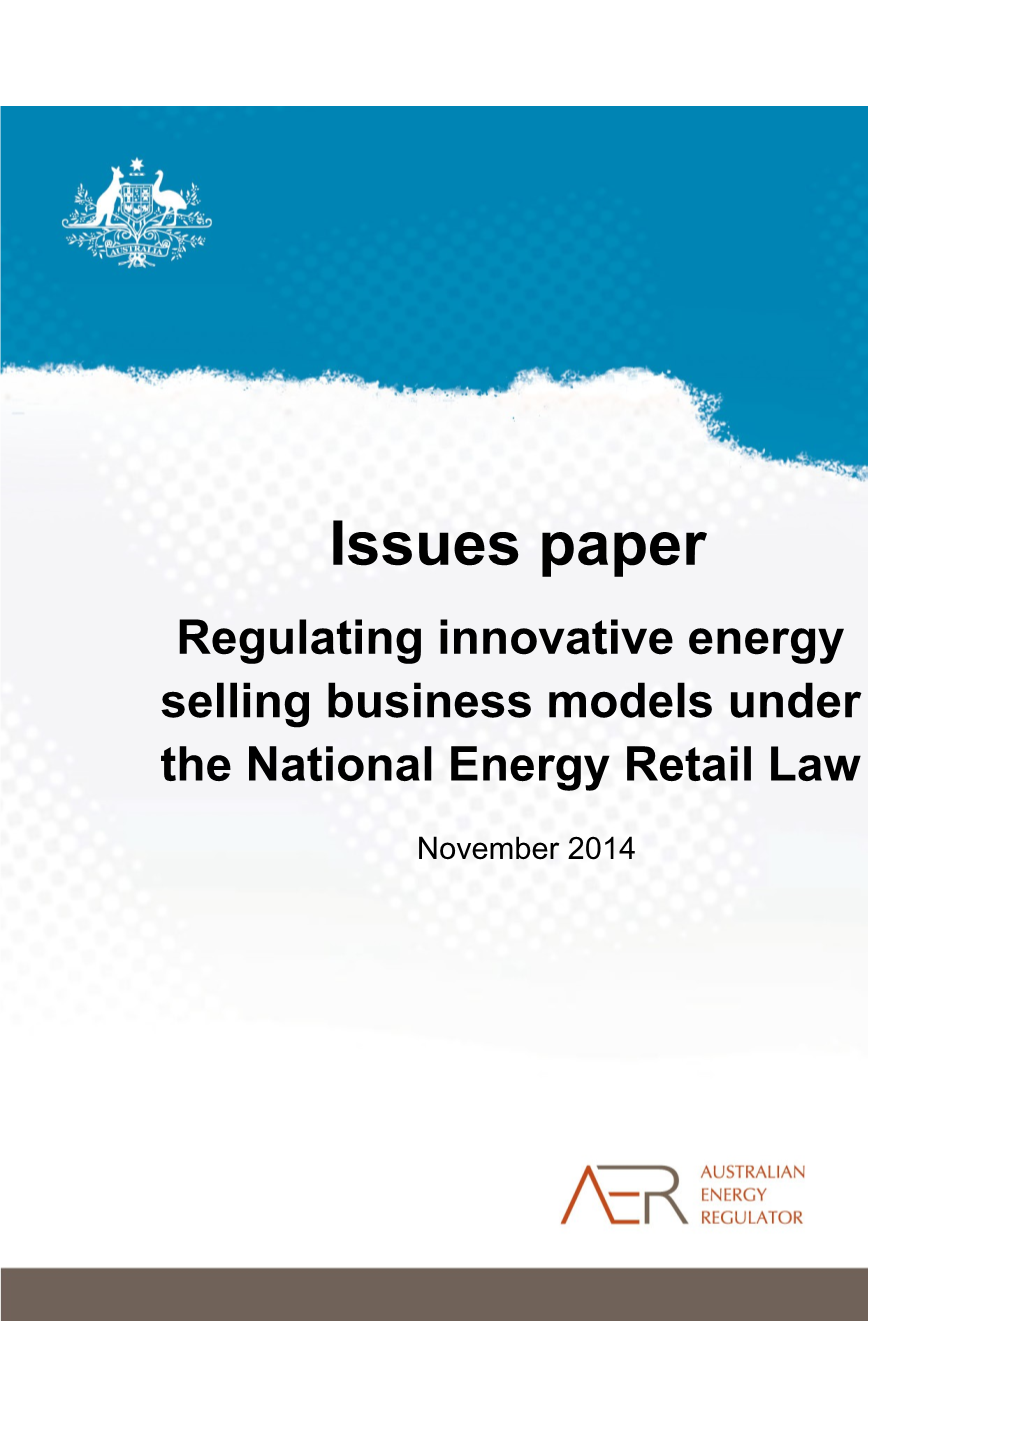 Regulating Innovative Energy Selling Business Models Under the National Energy Retail Law